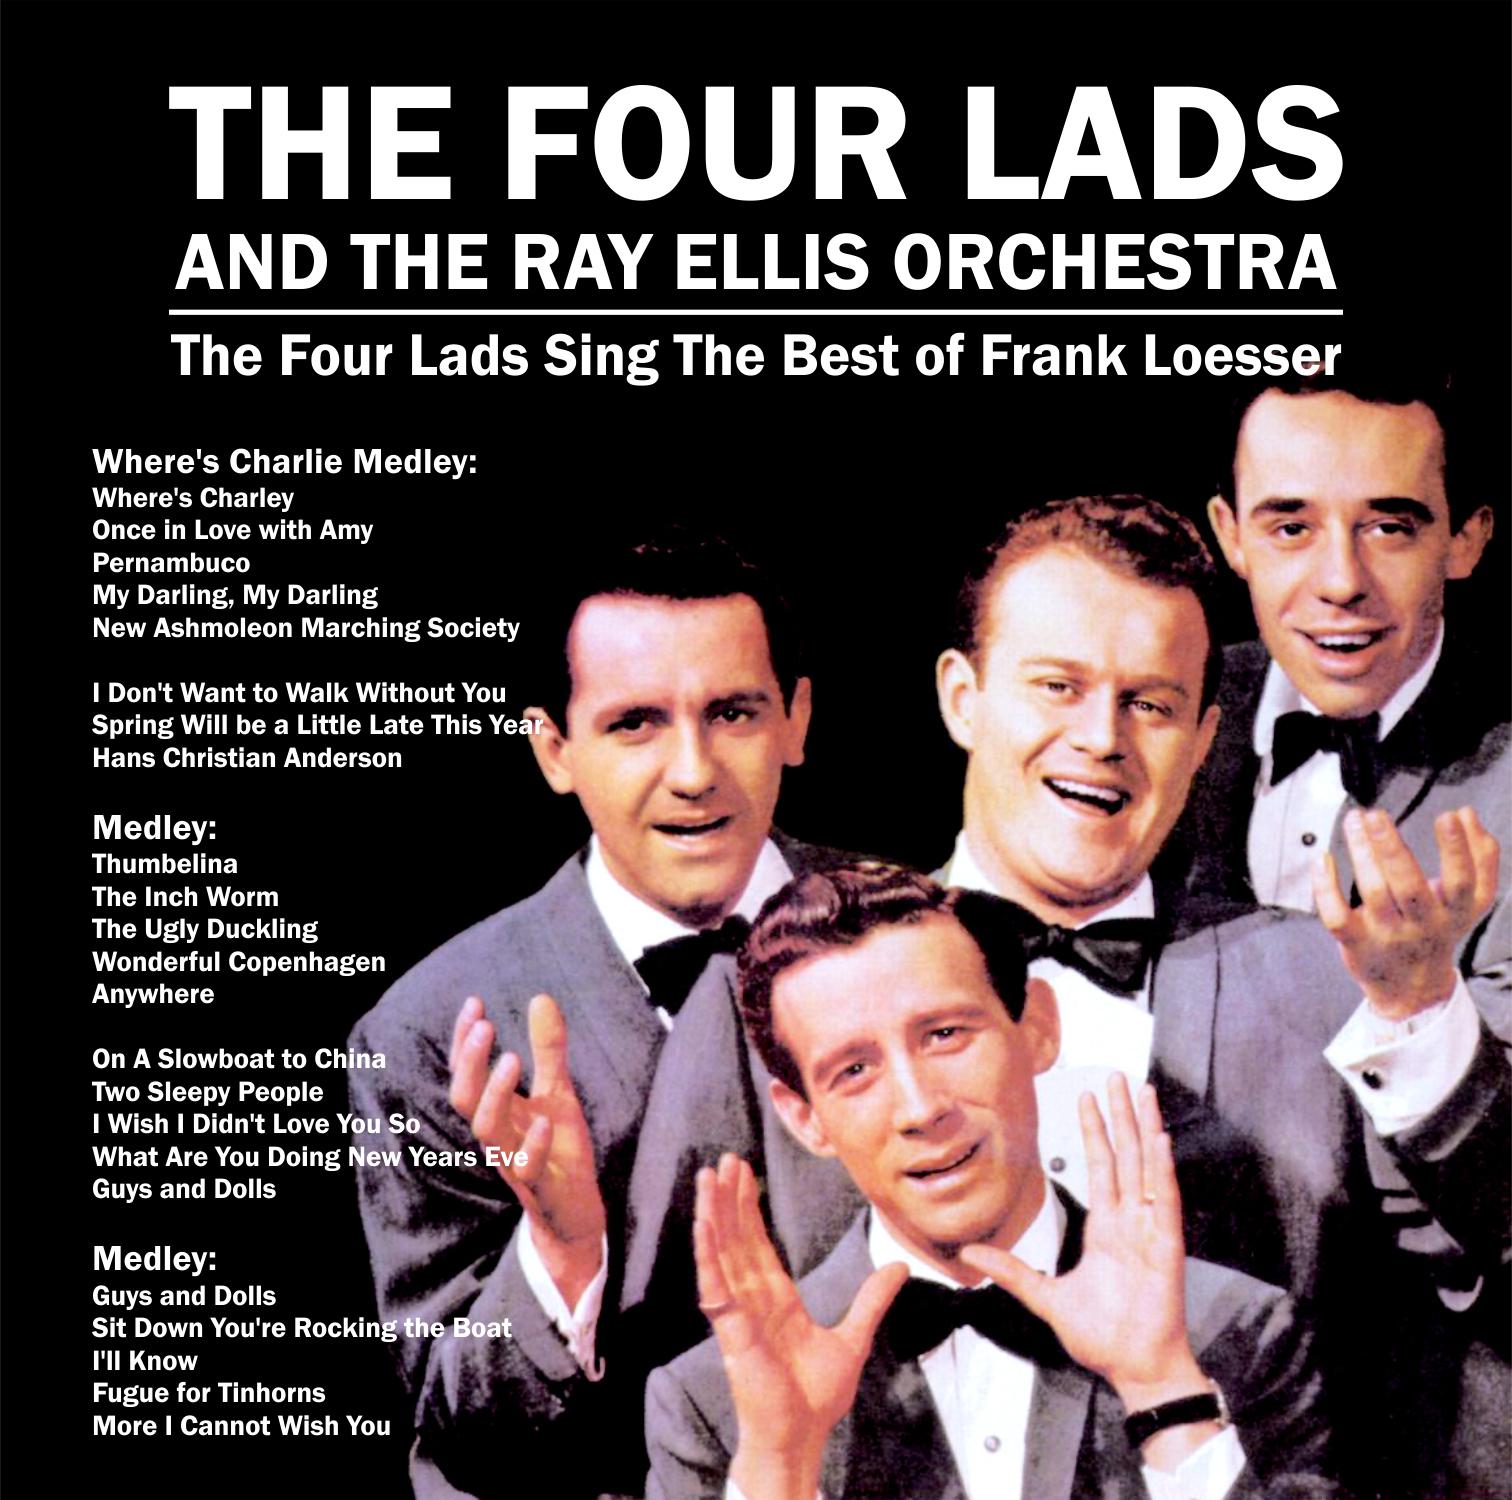 The Four Lads Sing the Best of Frank Loesser